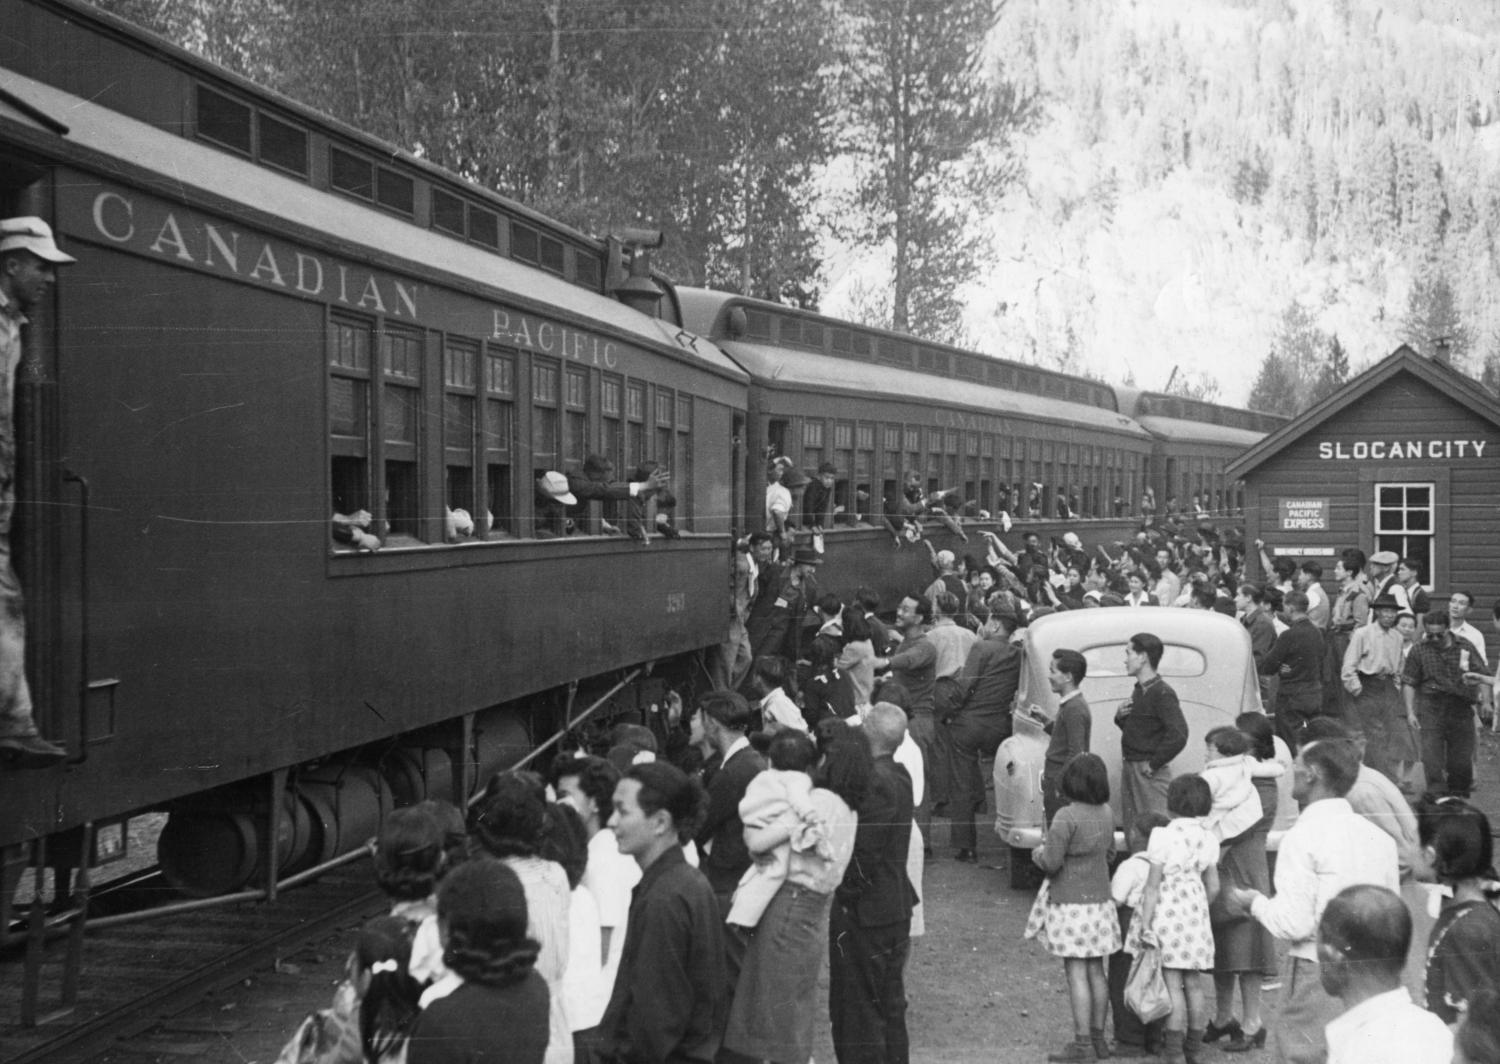 An image of a group of people standing by a train as it departs. A small building in the background has a sign which reads: "Slocan City".